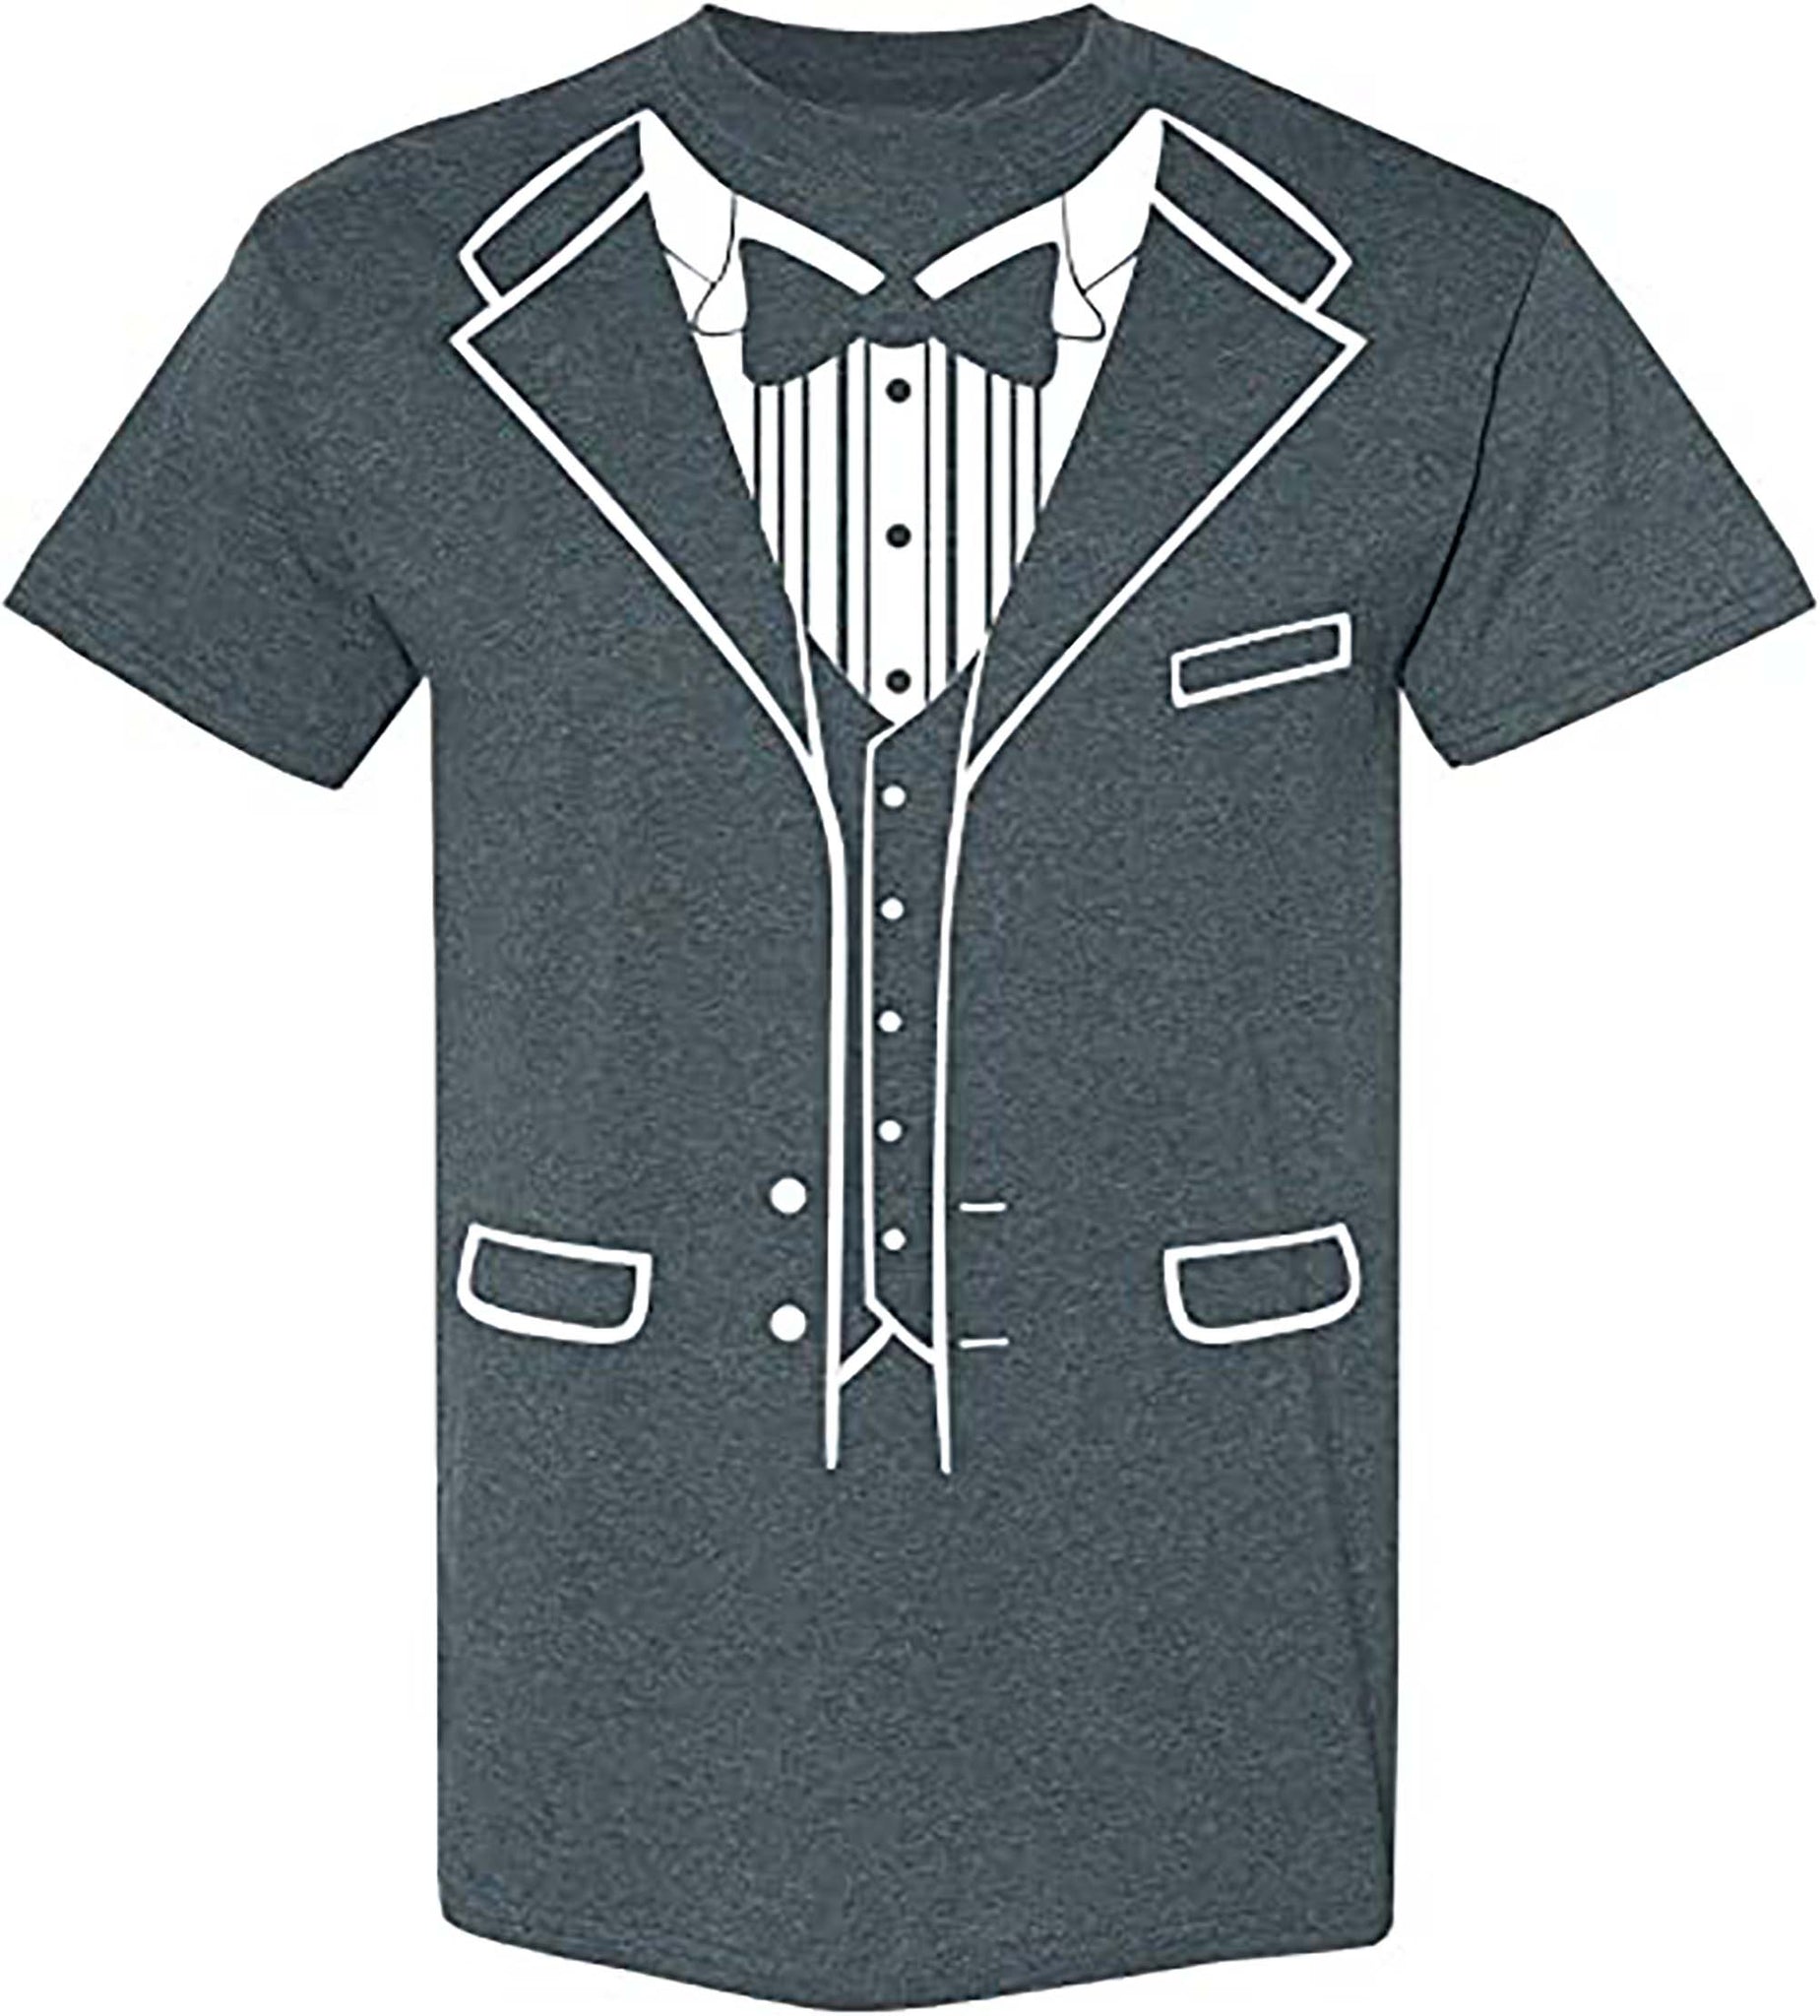 Tuxedo Classic with Bowtie Party Wedding Mens T-Shirt-black